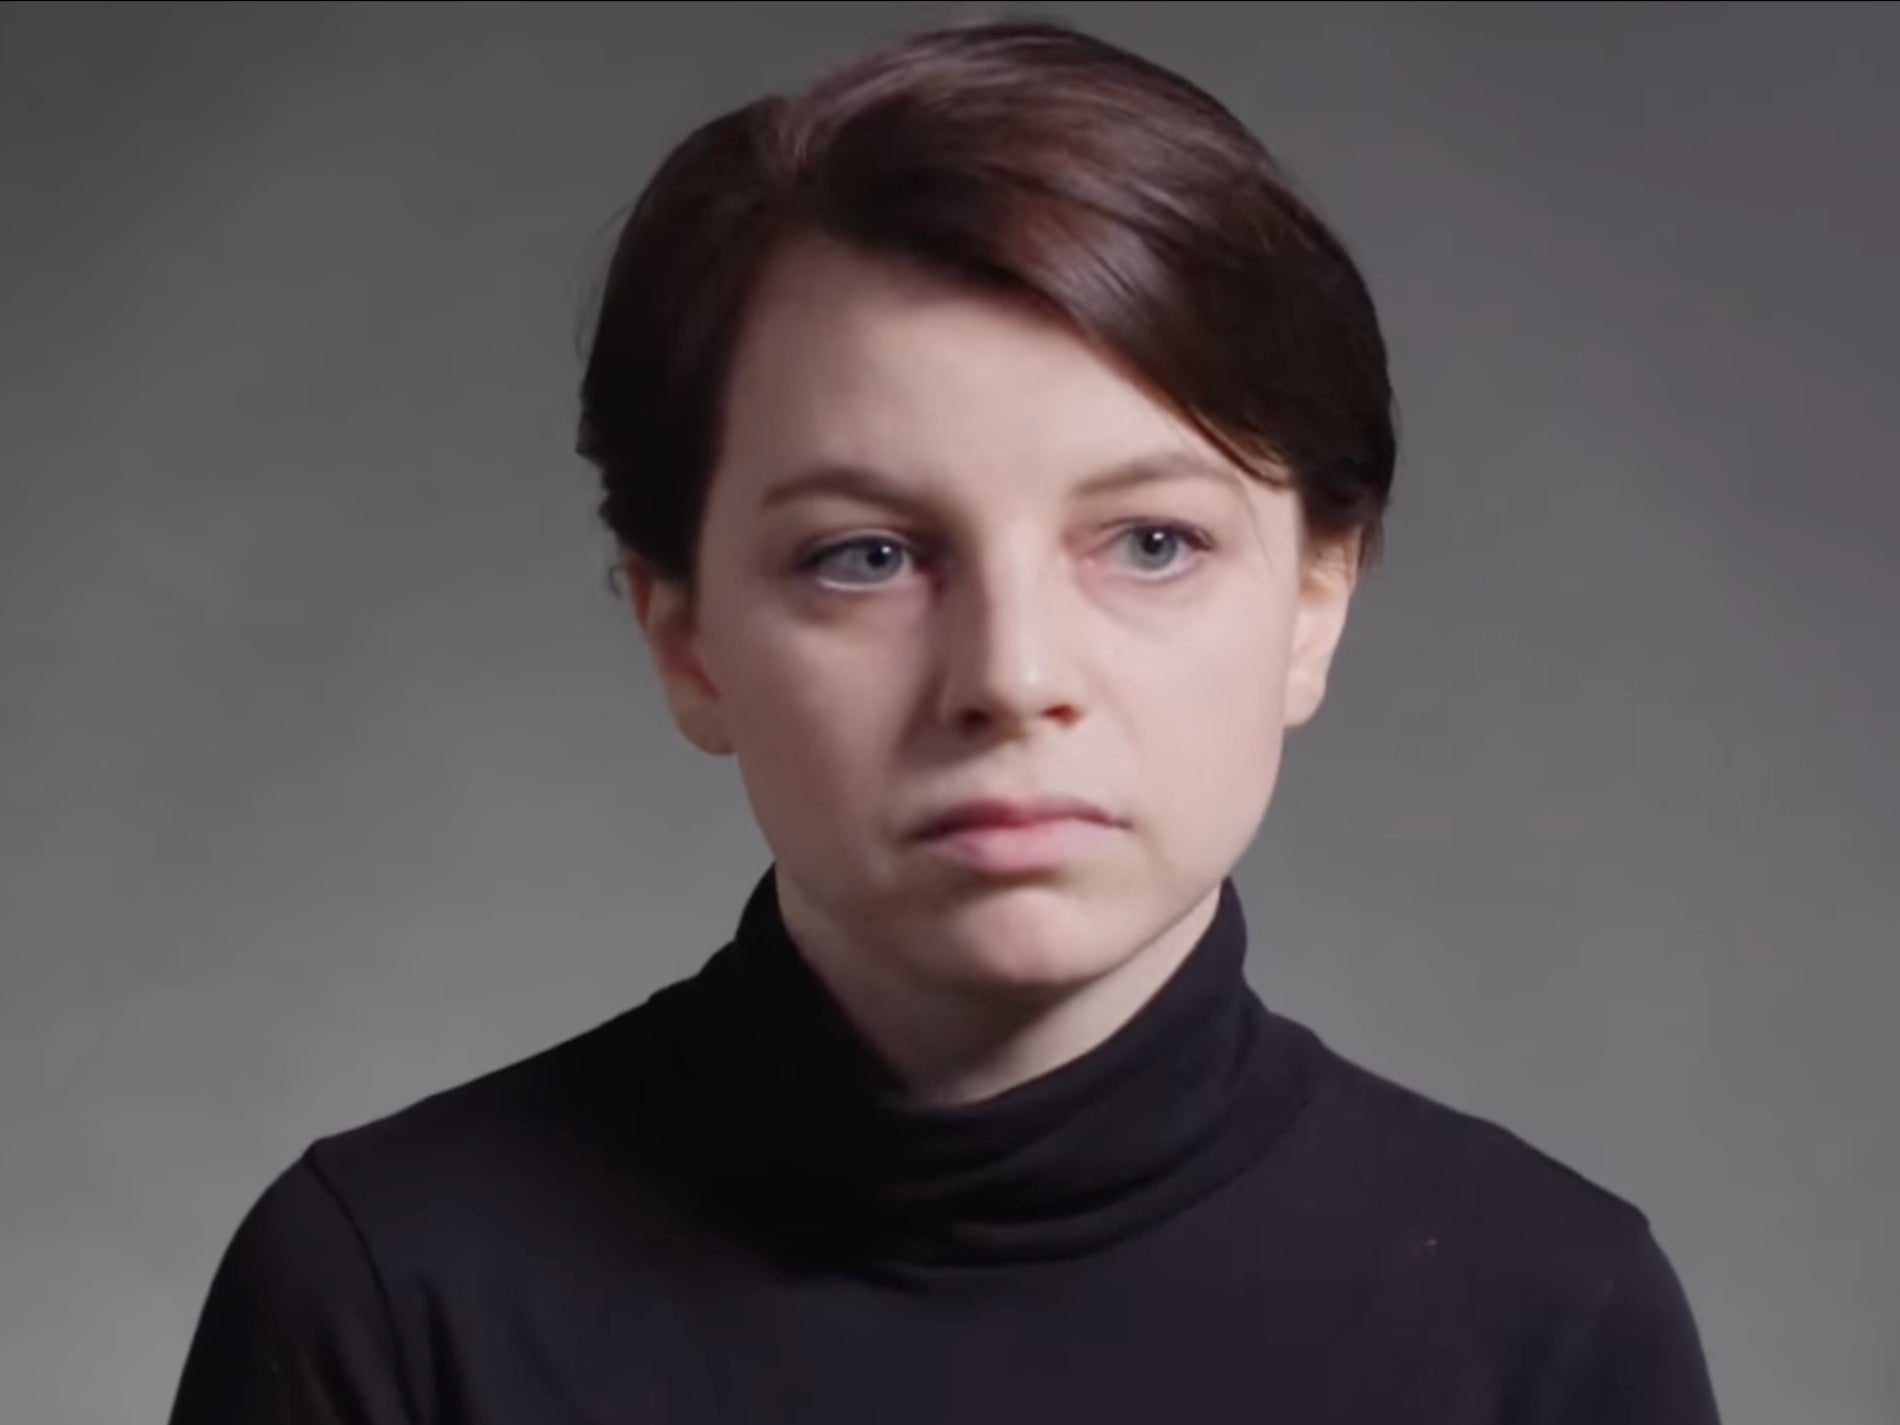 Moira Donegan in a January 2018 video by the New York Times